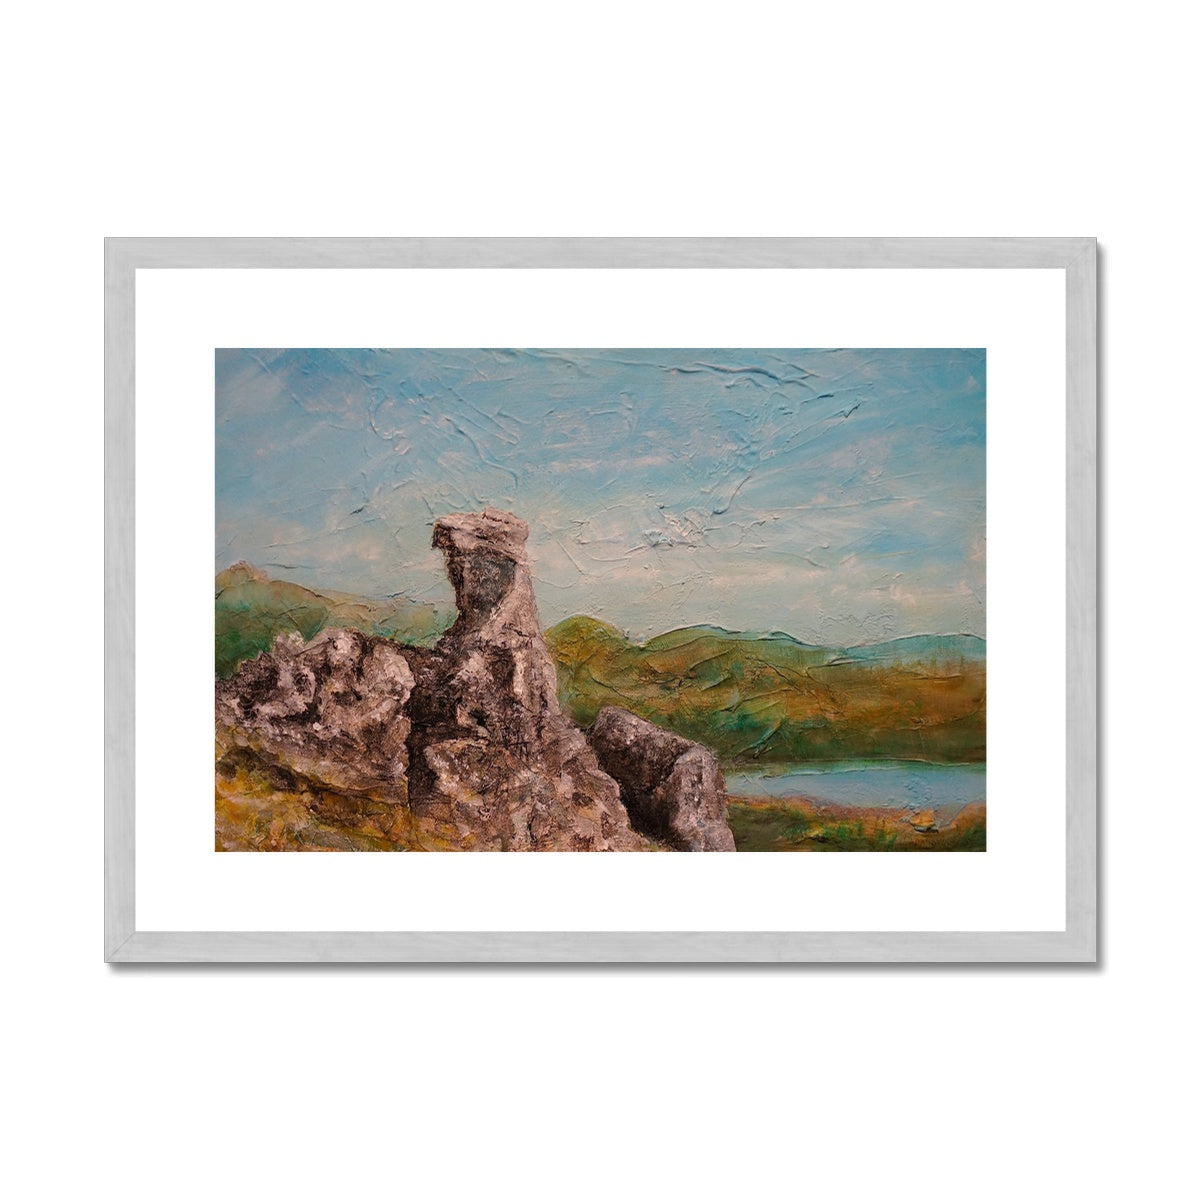 The Cobbler ii Painting | Antique Framed & Mounted Prints From Scotland-Antique Framed & Mounted Prints-Scottish Lochs & Mountains Art Gallery-A2 Landscape-Silver Frame-Paintings, Prints, Homeware, Art Gifts From Scotland By Scottish Artist Kevin Hunter